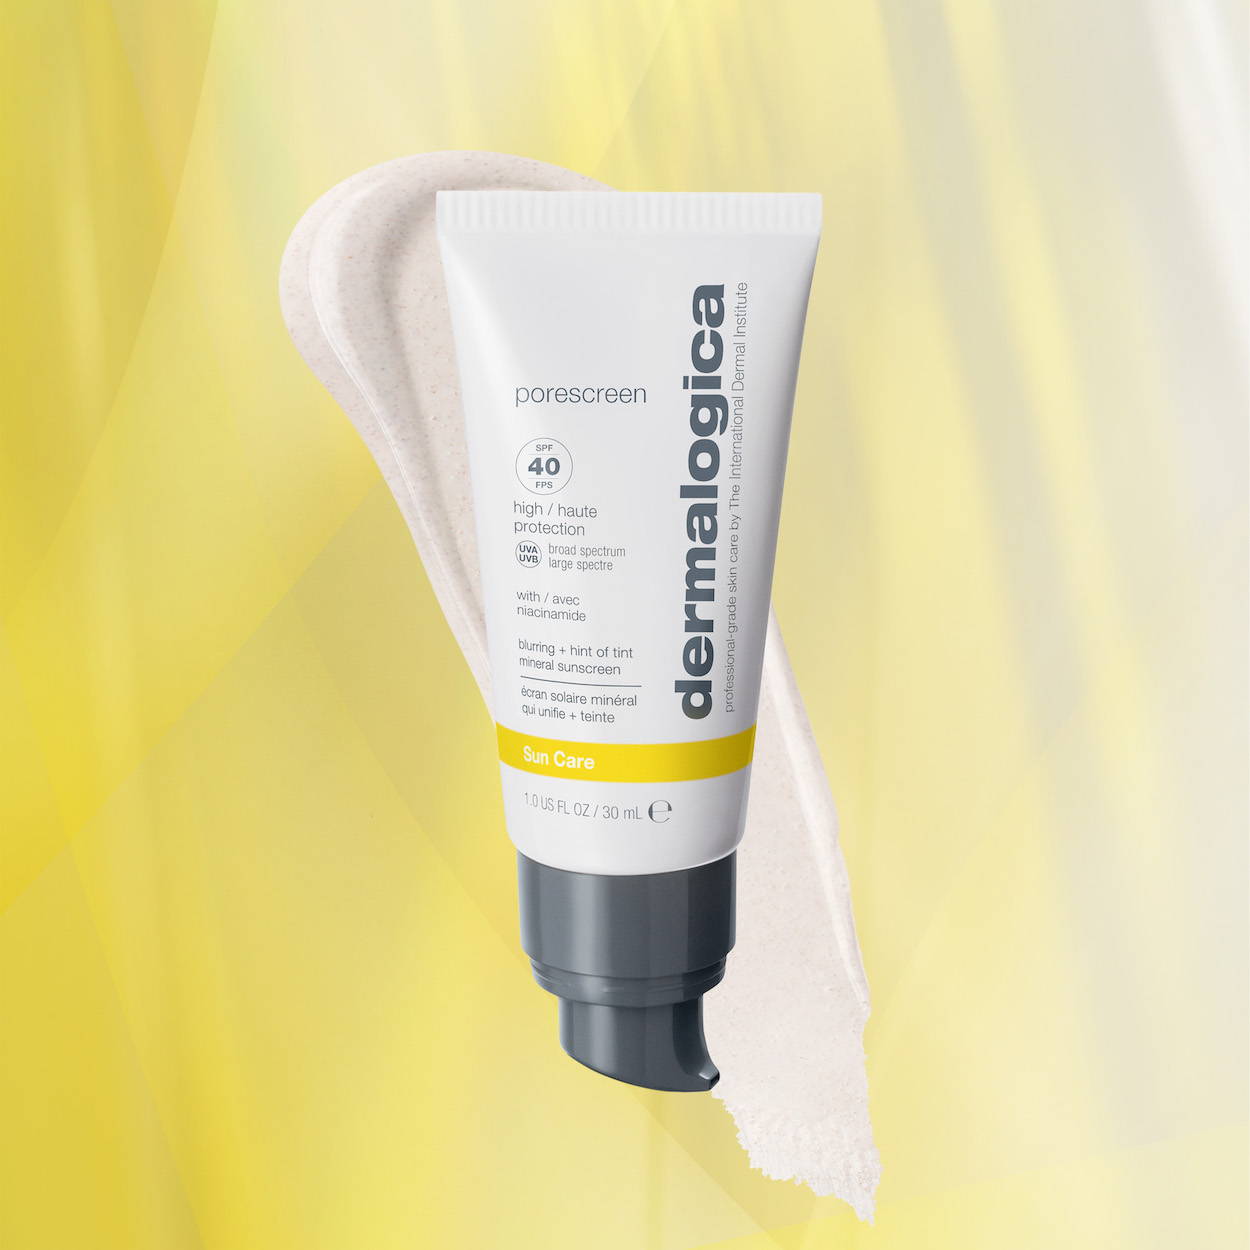 New Dermalogica Porescreen SPF 40 on yellow background with product swatch behind it